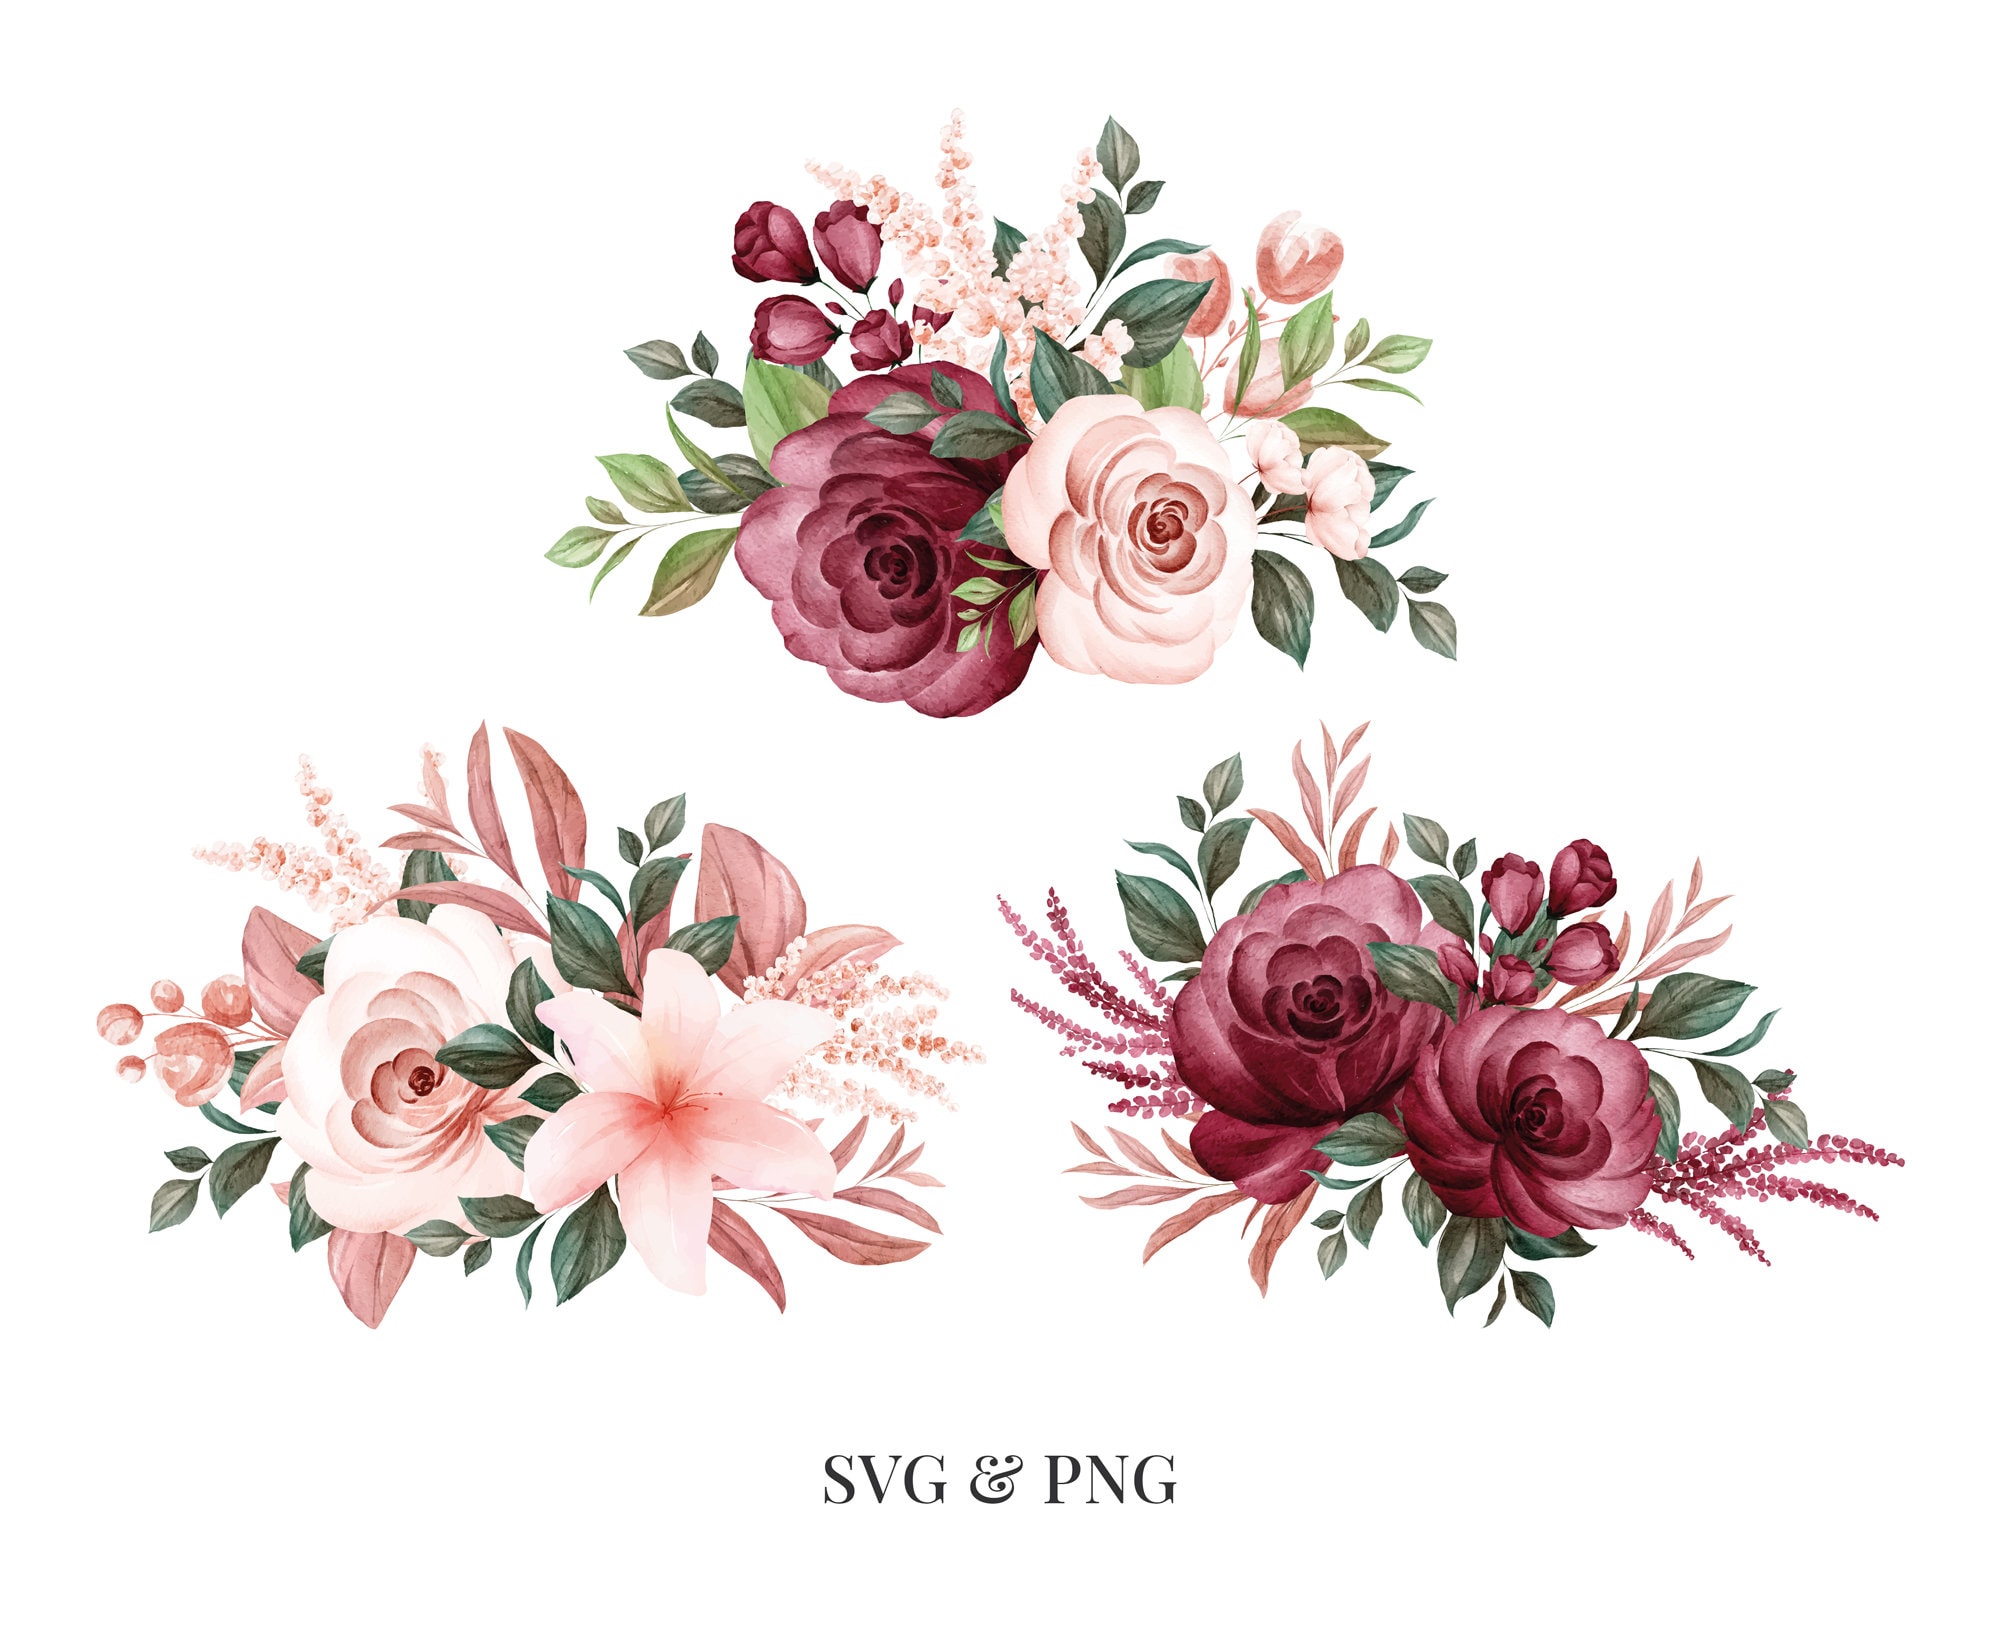 Watercolor Flower SVG PNG